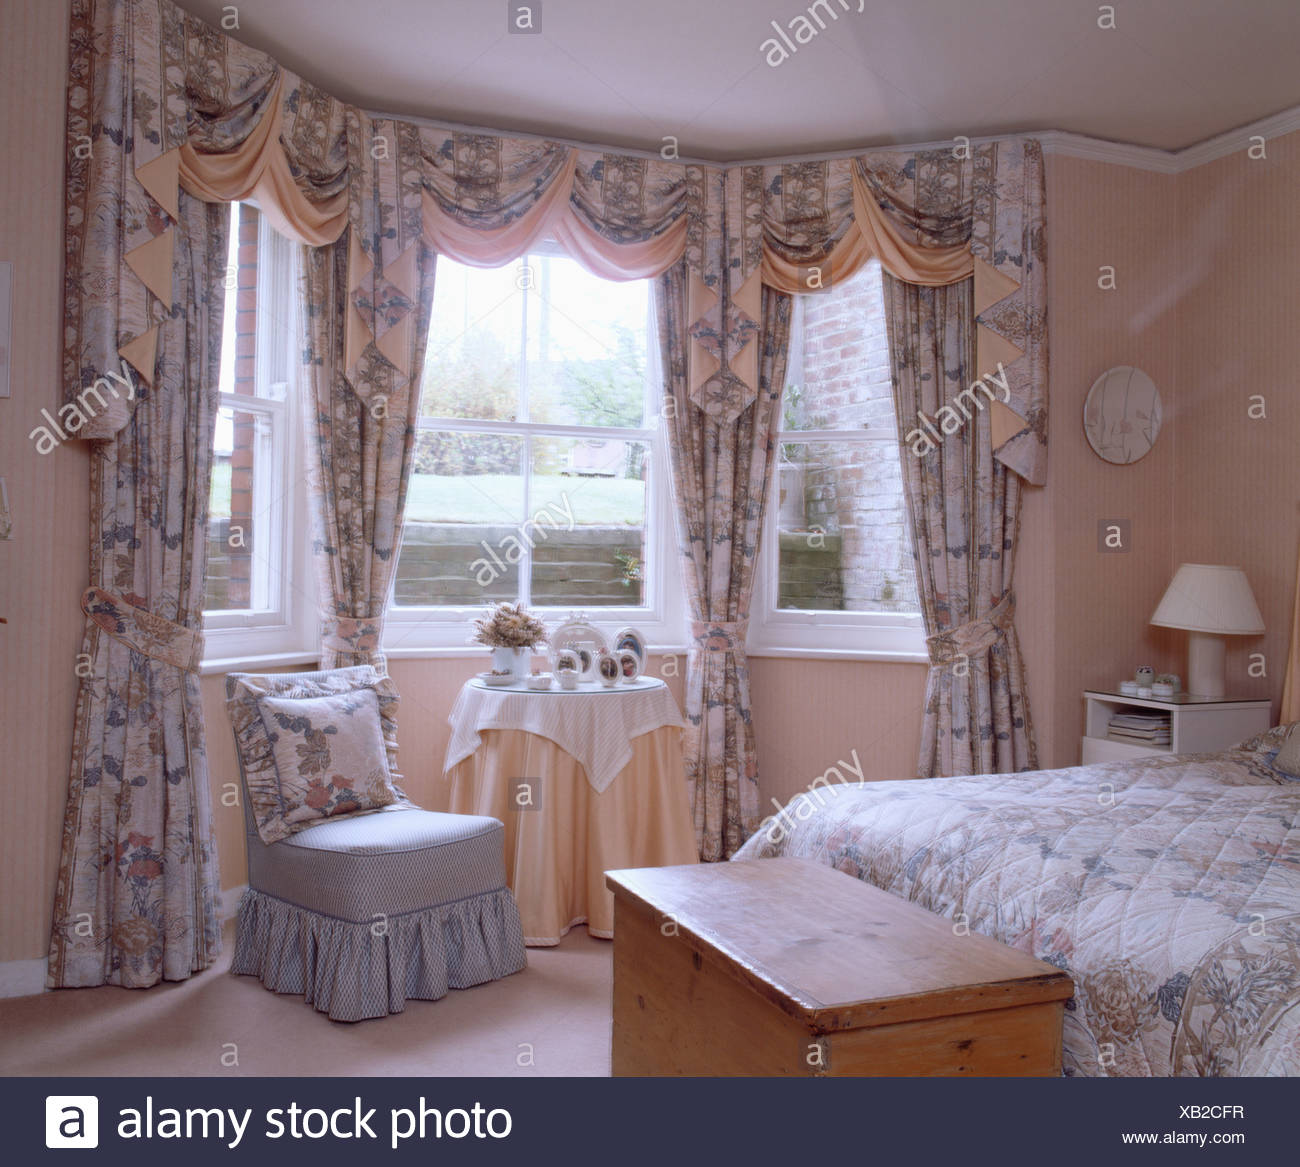 Peach Bedroom With Small Blue Upholstered Chair And Floral